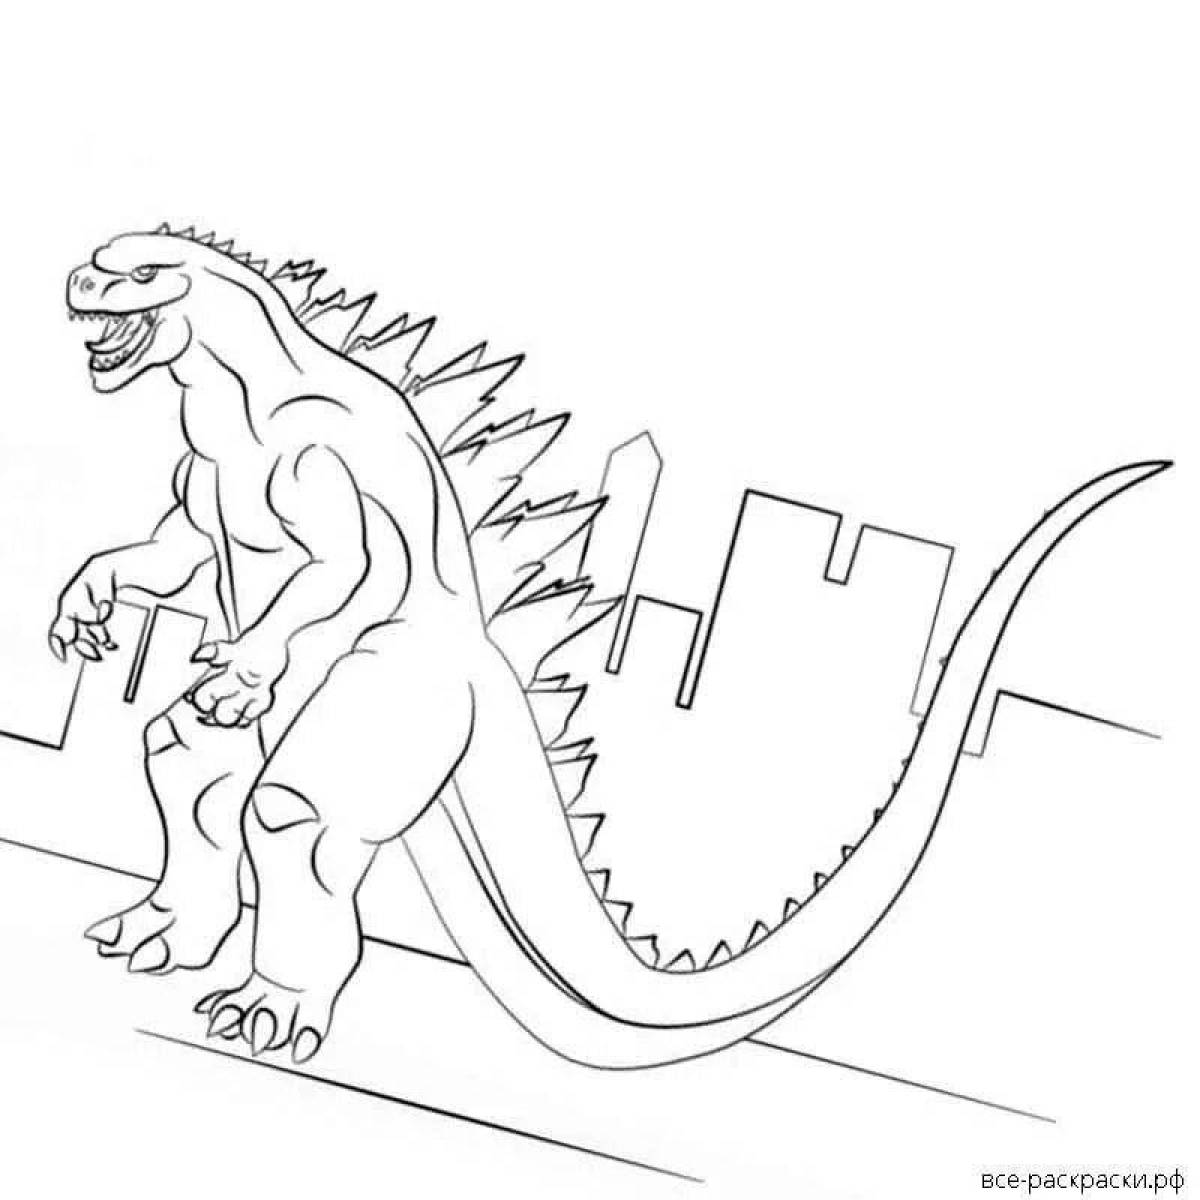 Amazing shit coloring page